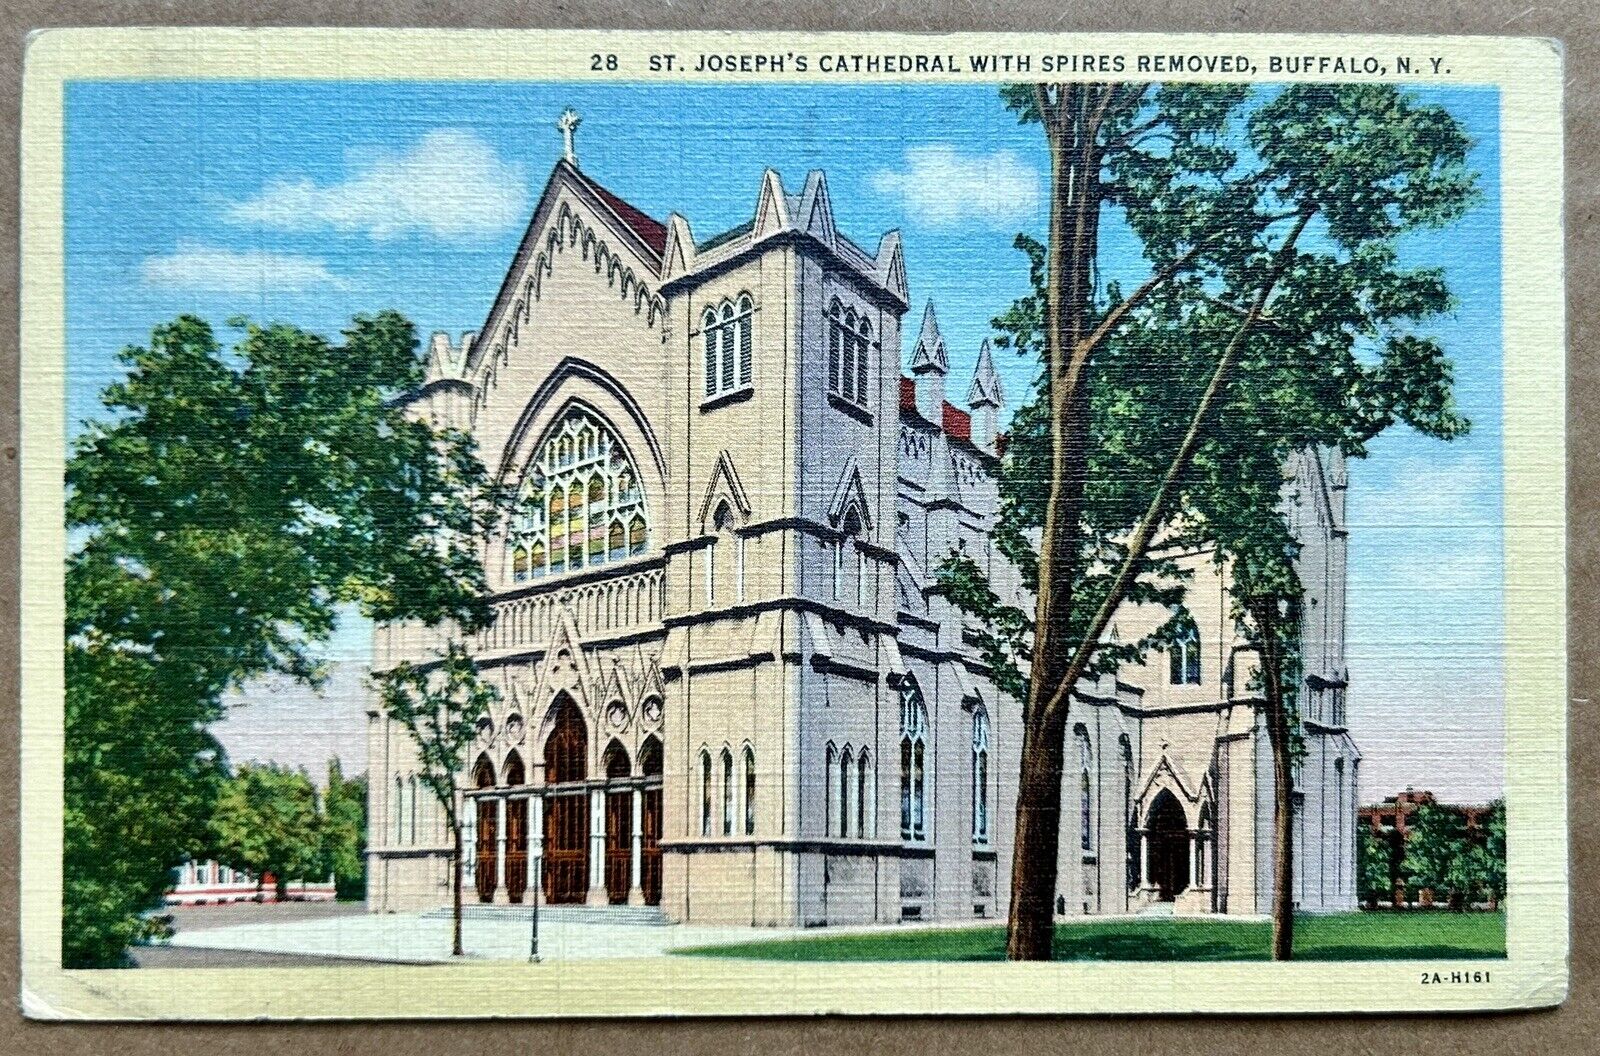 ST. JOSEPH'S CATHEDRAL WITH SPIRES REMOVED, BUFFALO, Vintage Postcard 1941